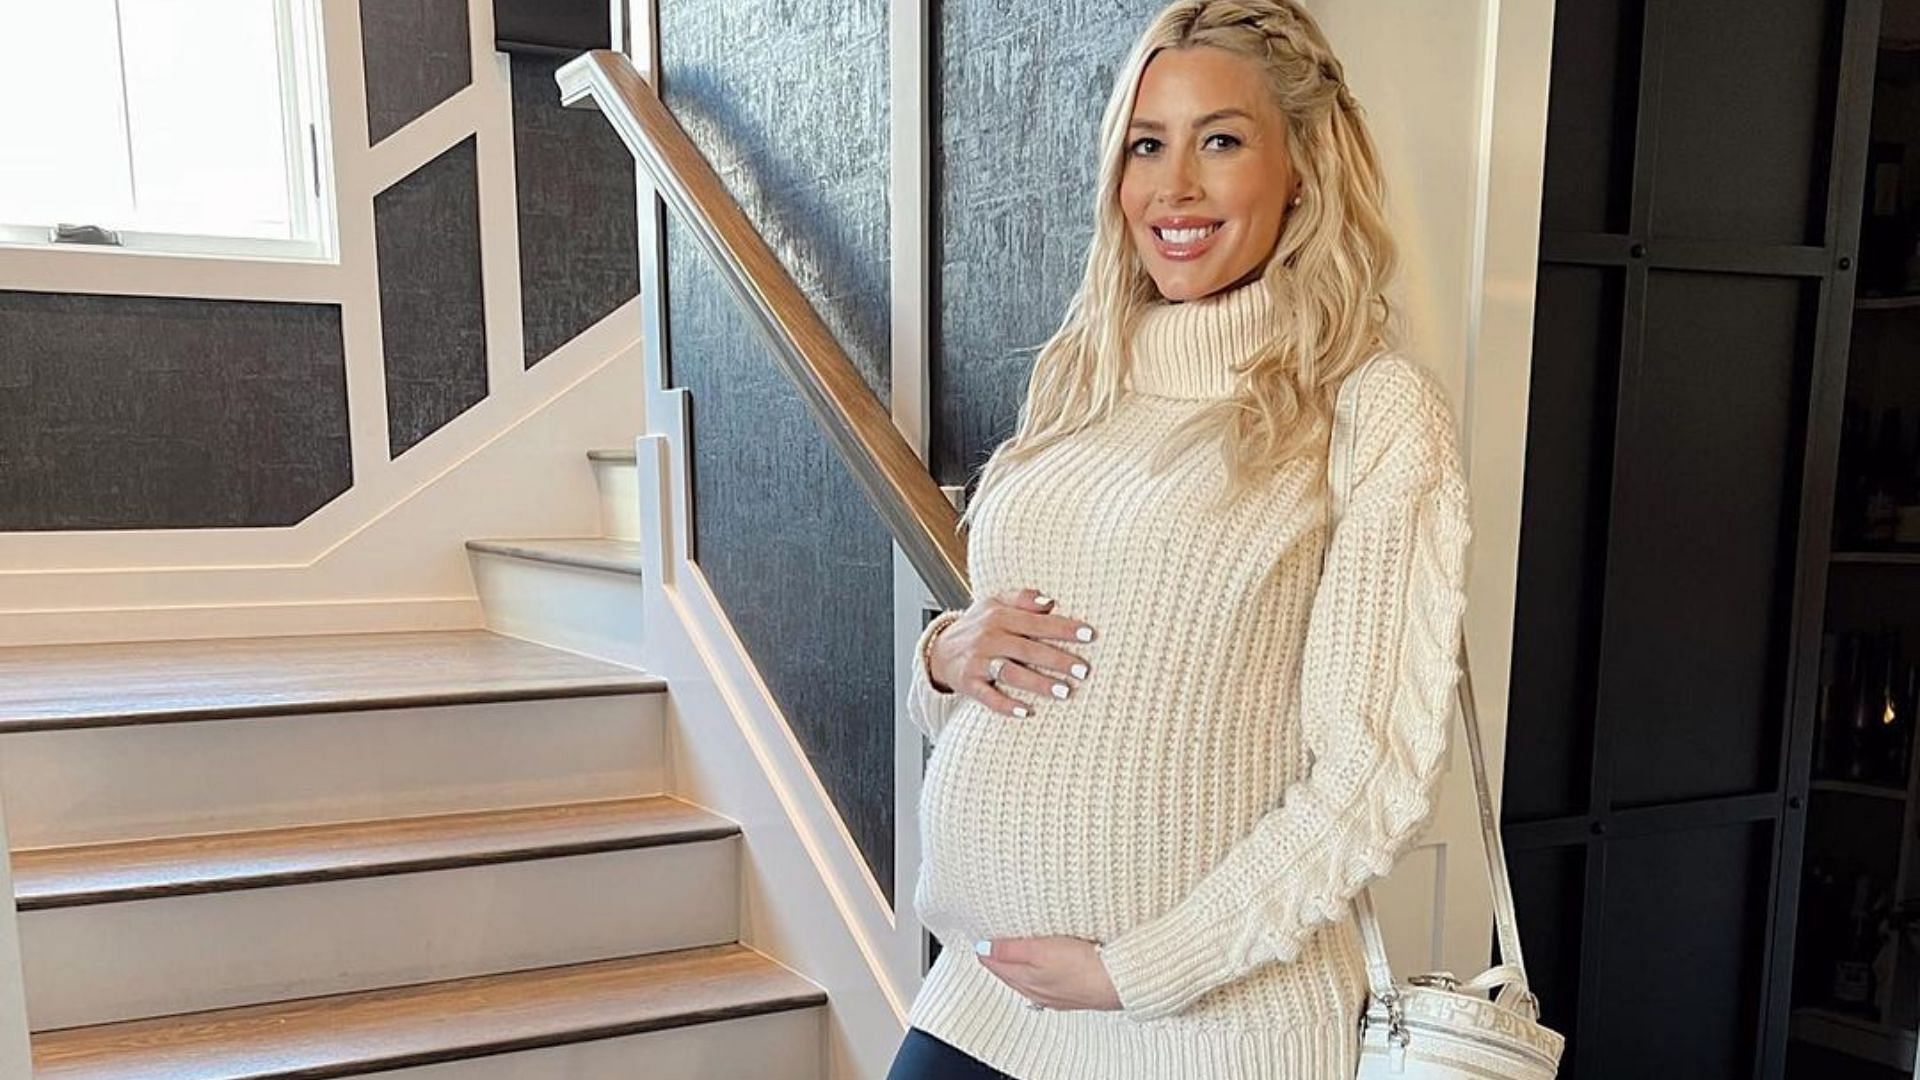 Selling Sunset&rsquo;s Heather Rae El Moussa &ldquo;not doing very good&rdquo; in her pregnancy due to pain (Image via theheatherraeelmoussa/Instagram)